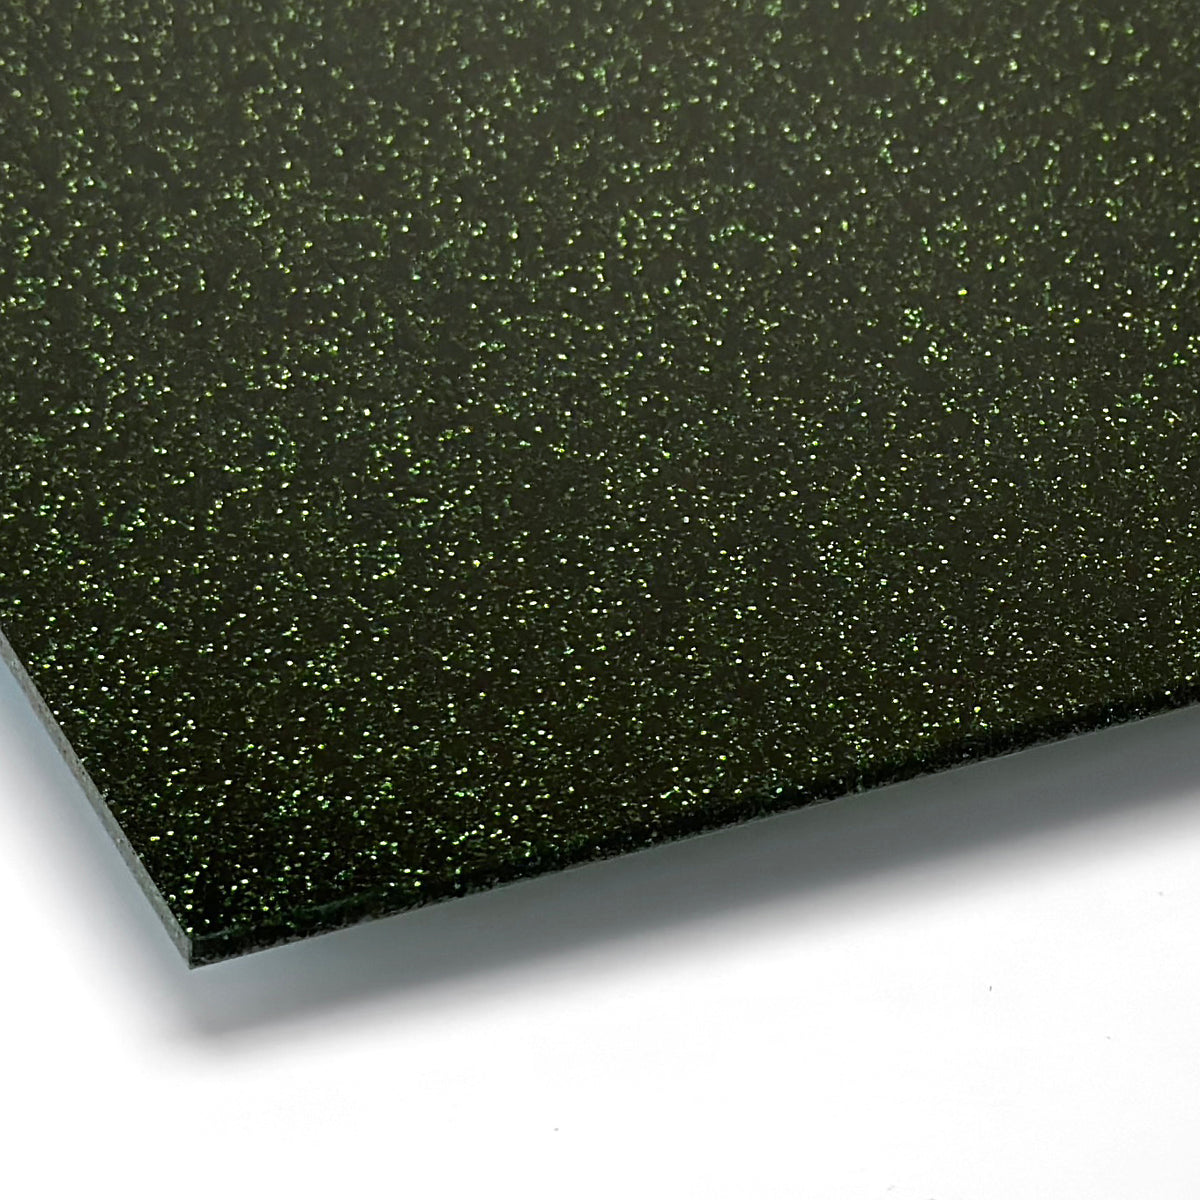 Glitter Forest Green Acrylic with laser cutting & printing - 300x200mm